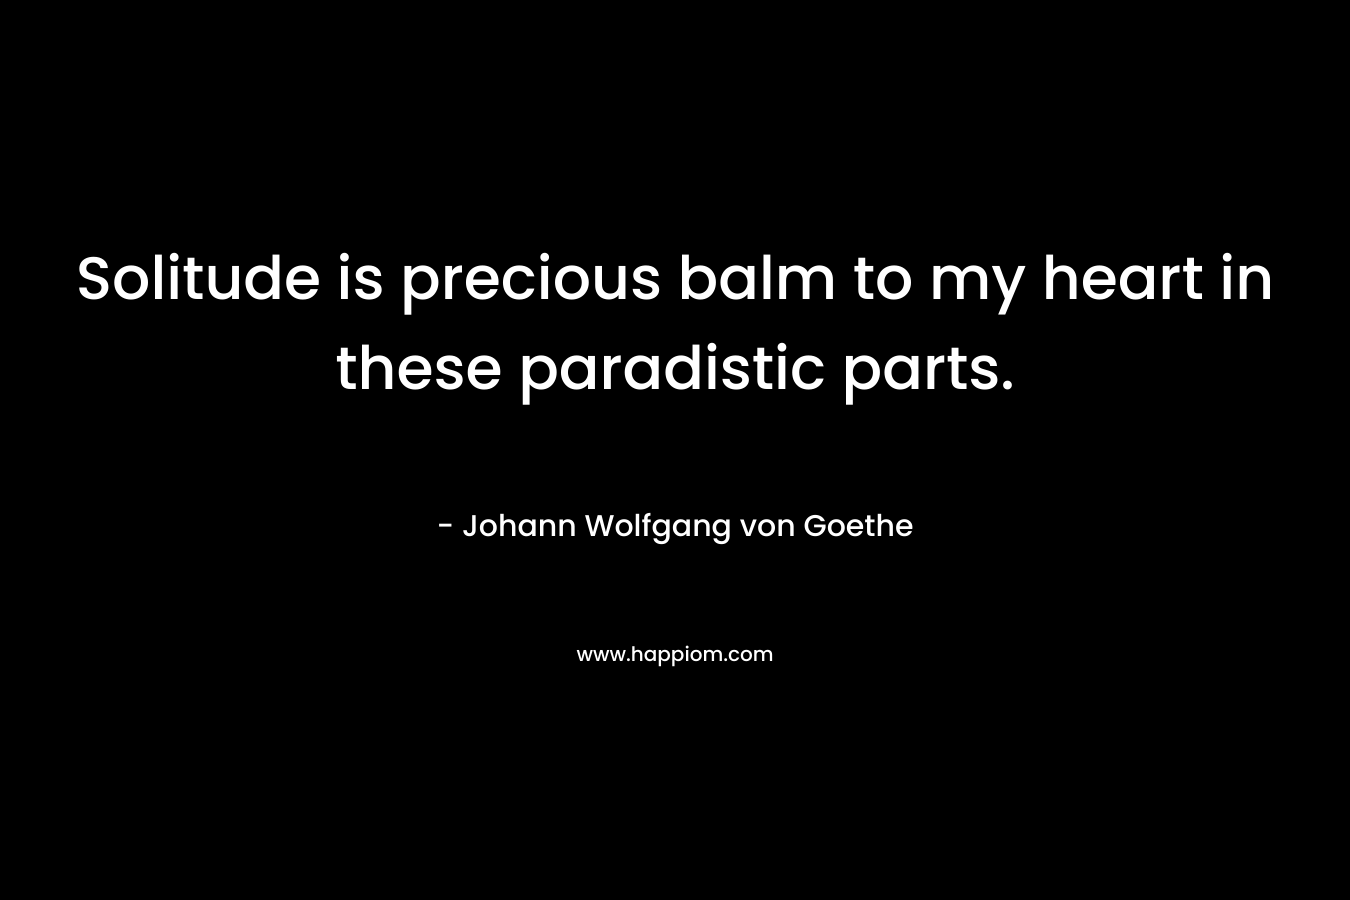 Solitude is precious balm to my heart in these paradistic parts. – Johann Wolfgang von Goethe